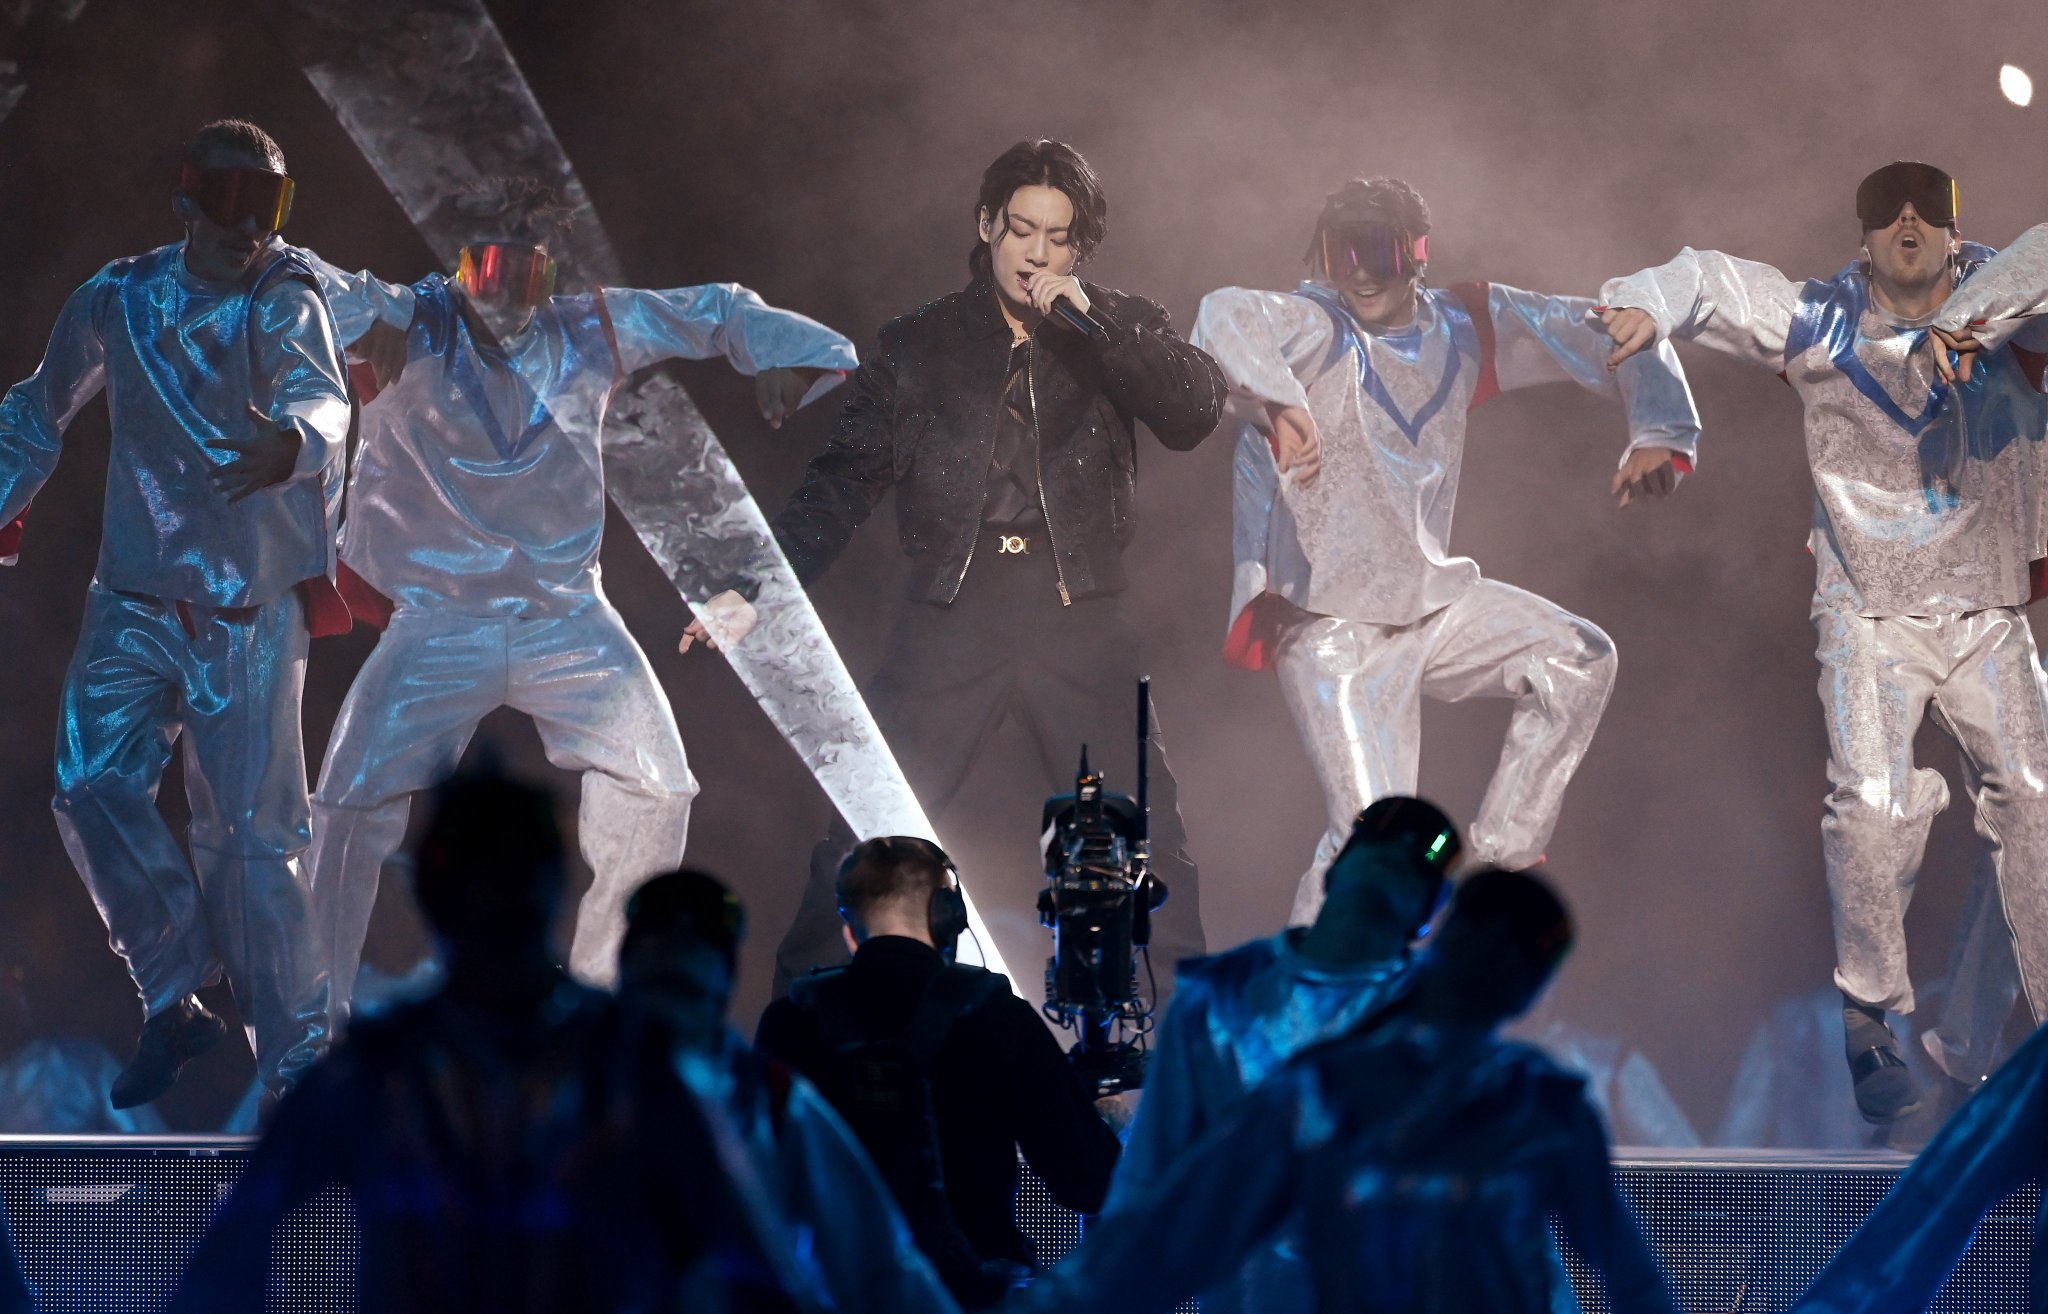 Jeon Jung-kook: South Korean pop star who performed at World Cup opening ceremony